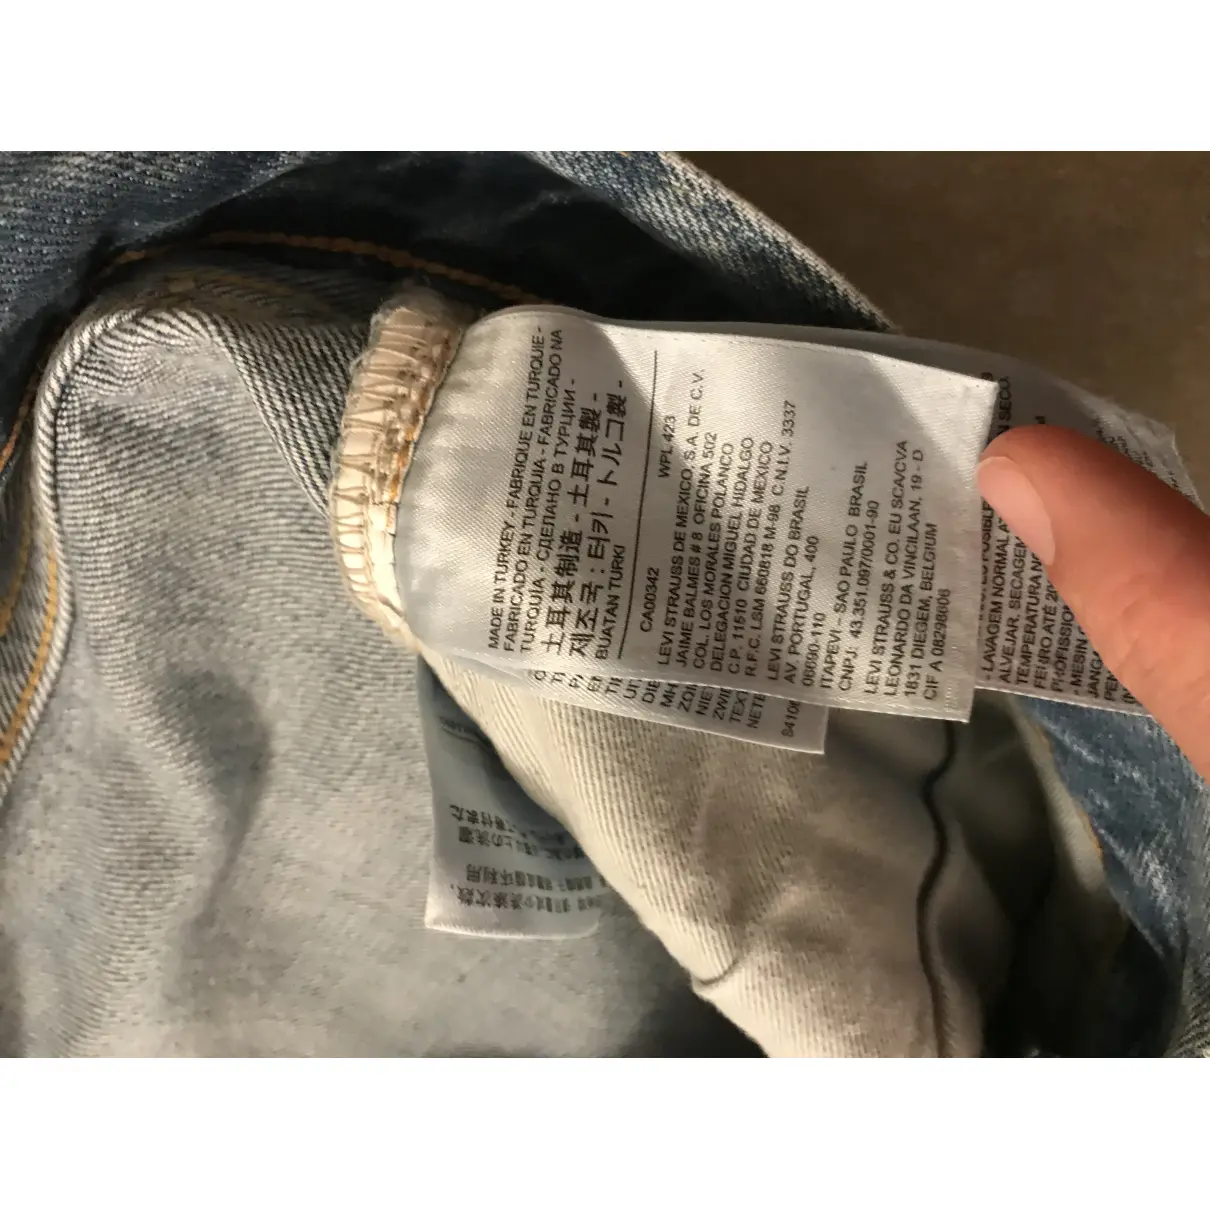 Straight jeans Levi's Vintage Clothing